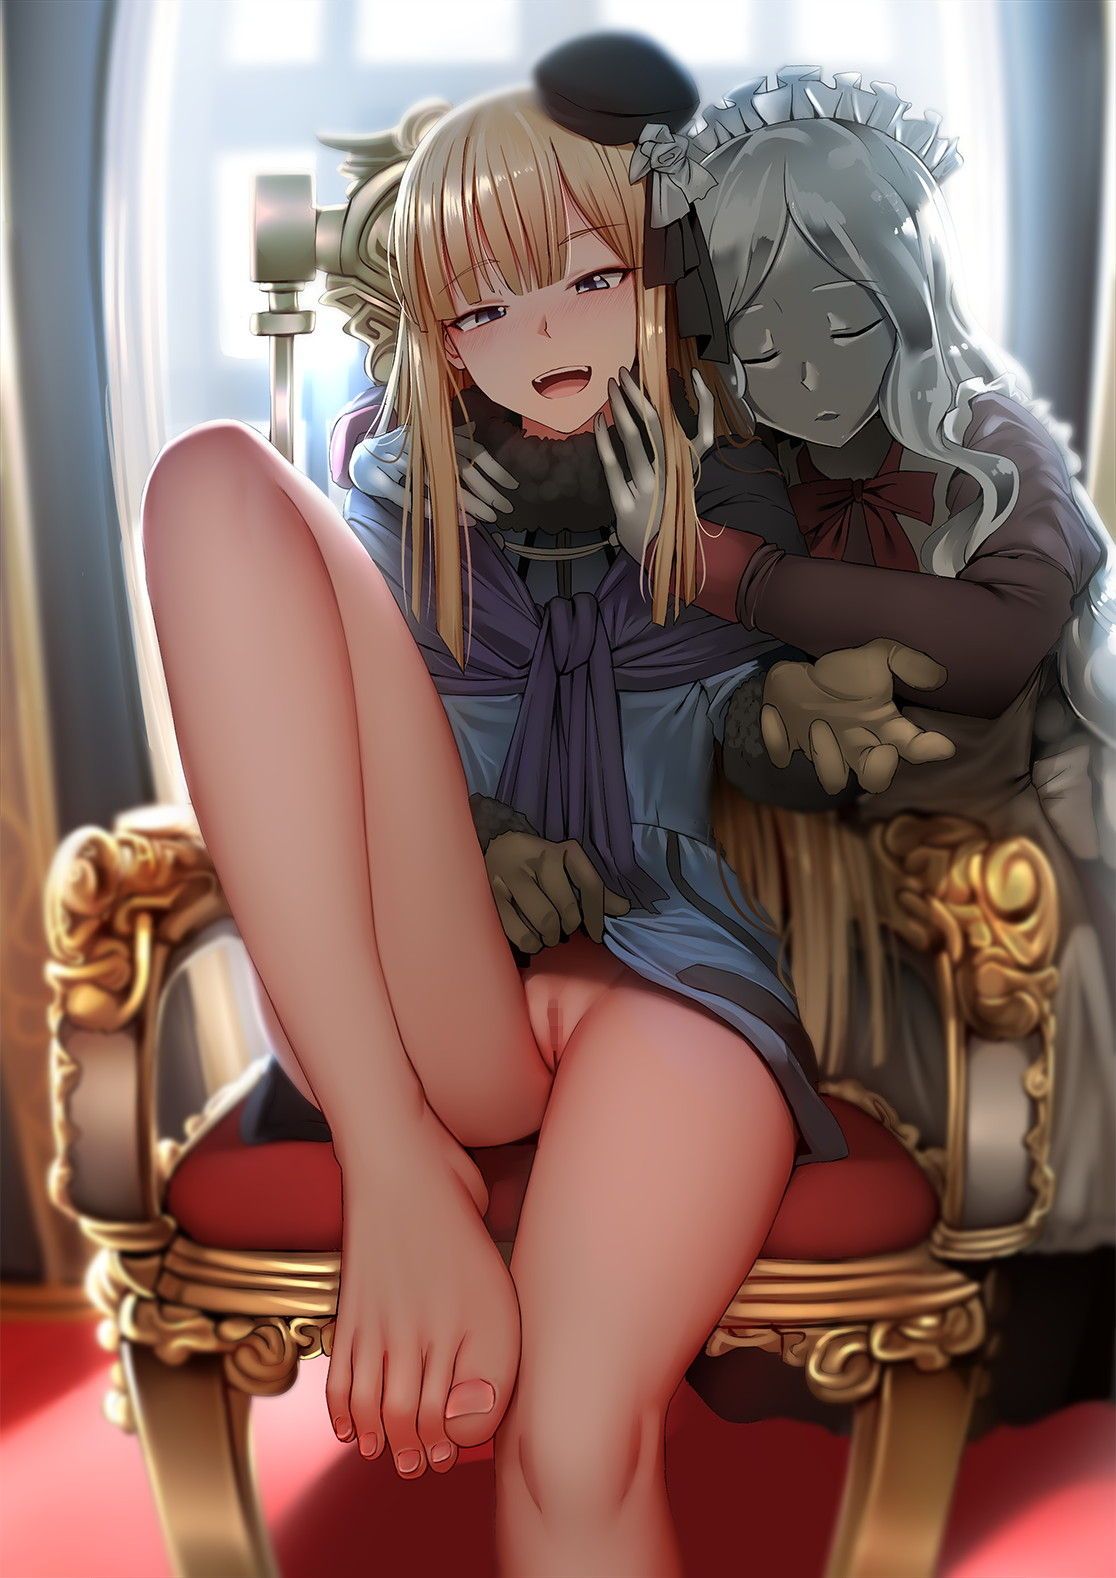 [Case Book of Lord Herme Roy II] Moe &amp; erotic images of Lynes herme Roy Archisolte (Shiba Shibai) ♪ [Fate/Grandorder] 2